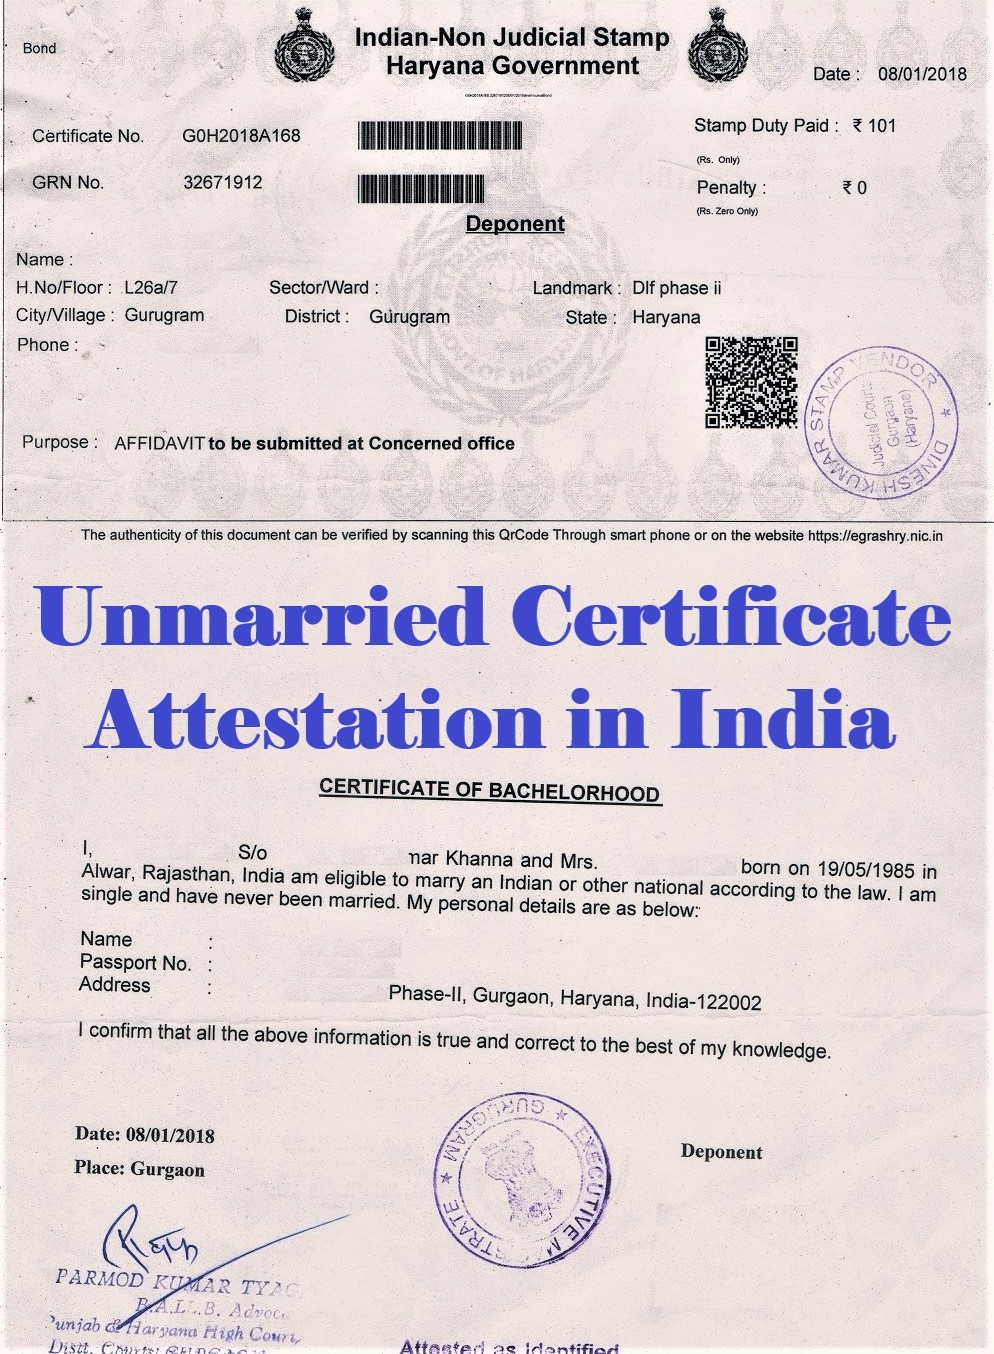 Unmarried Certificate Attestation from China Embassy